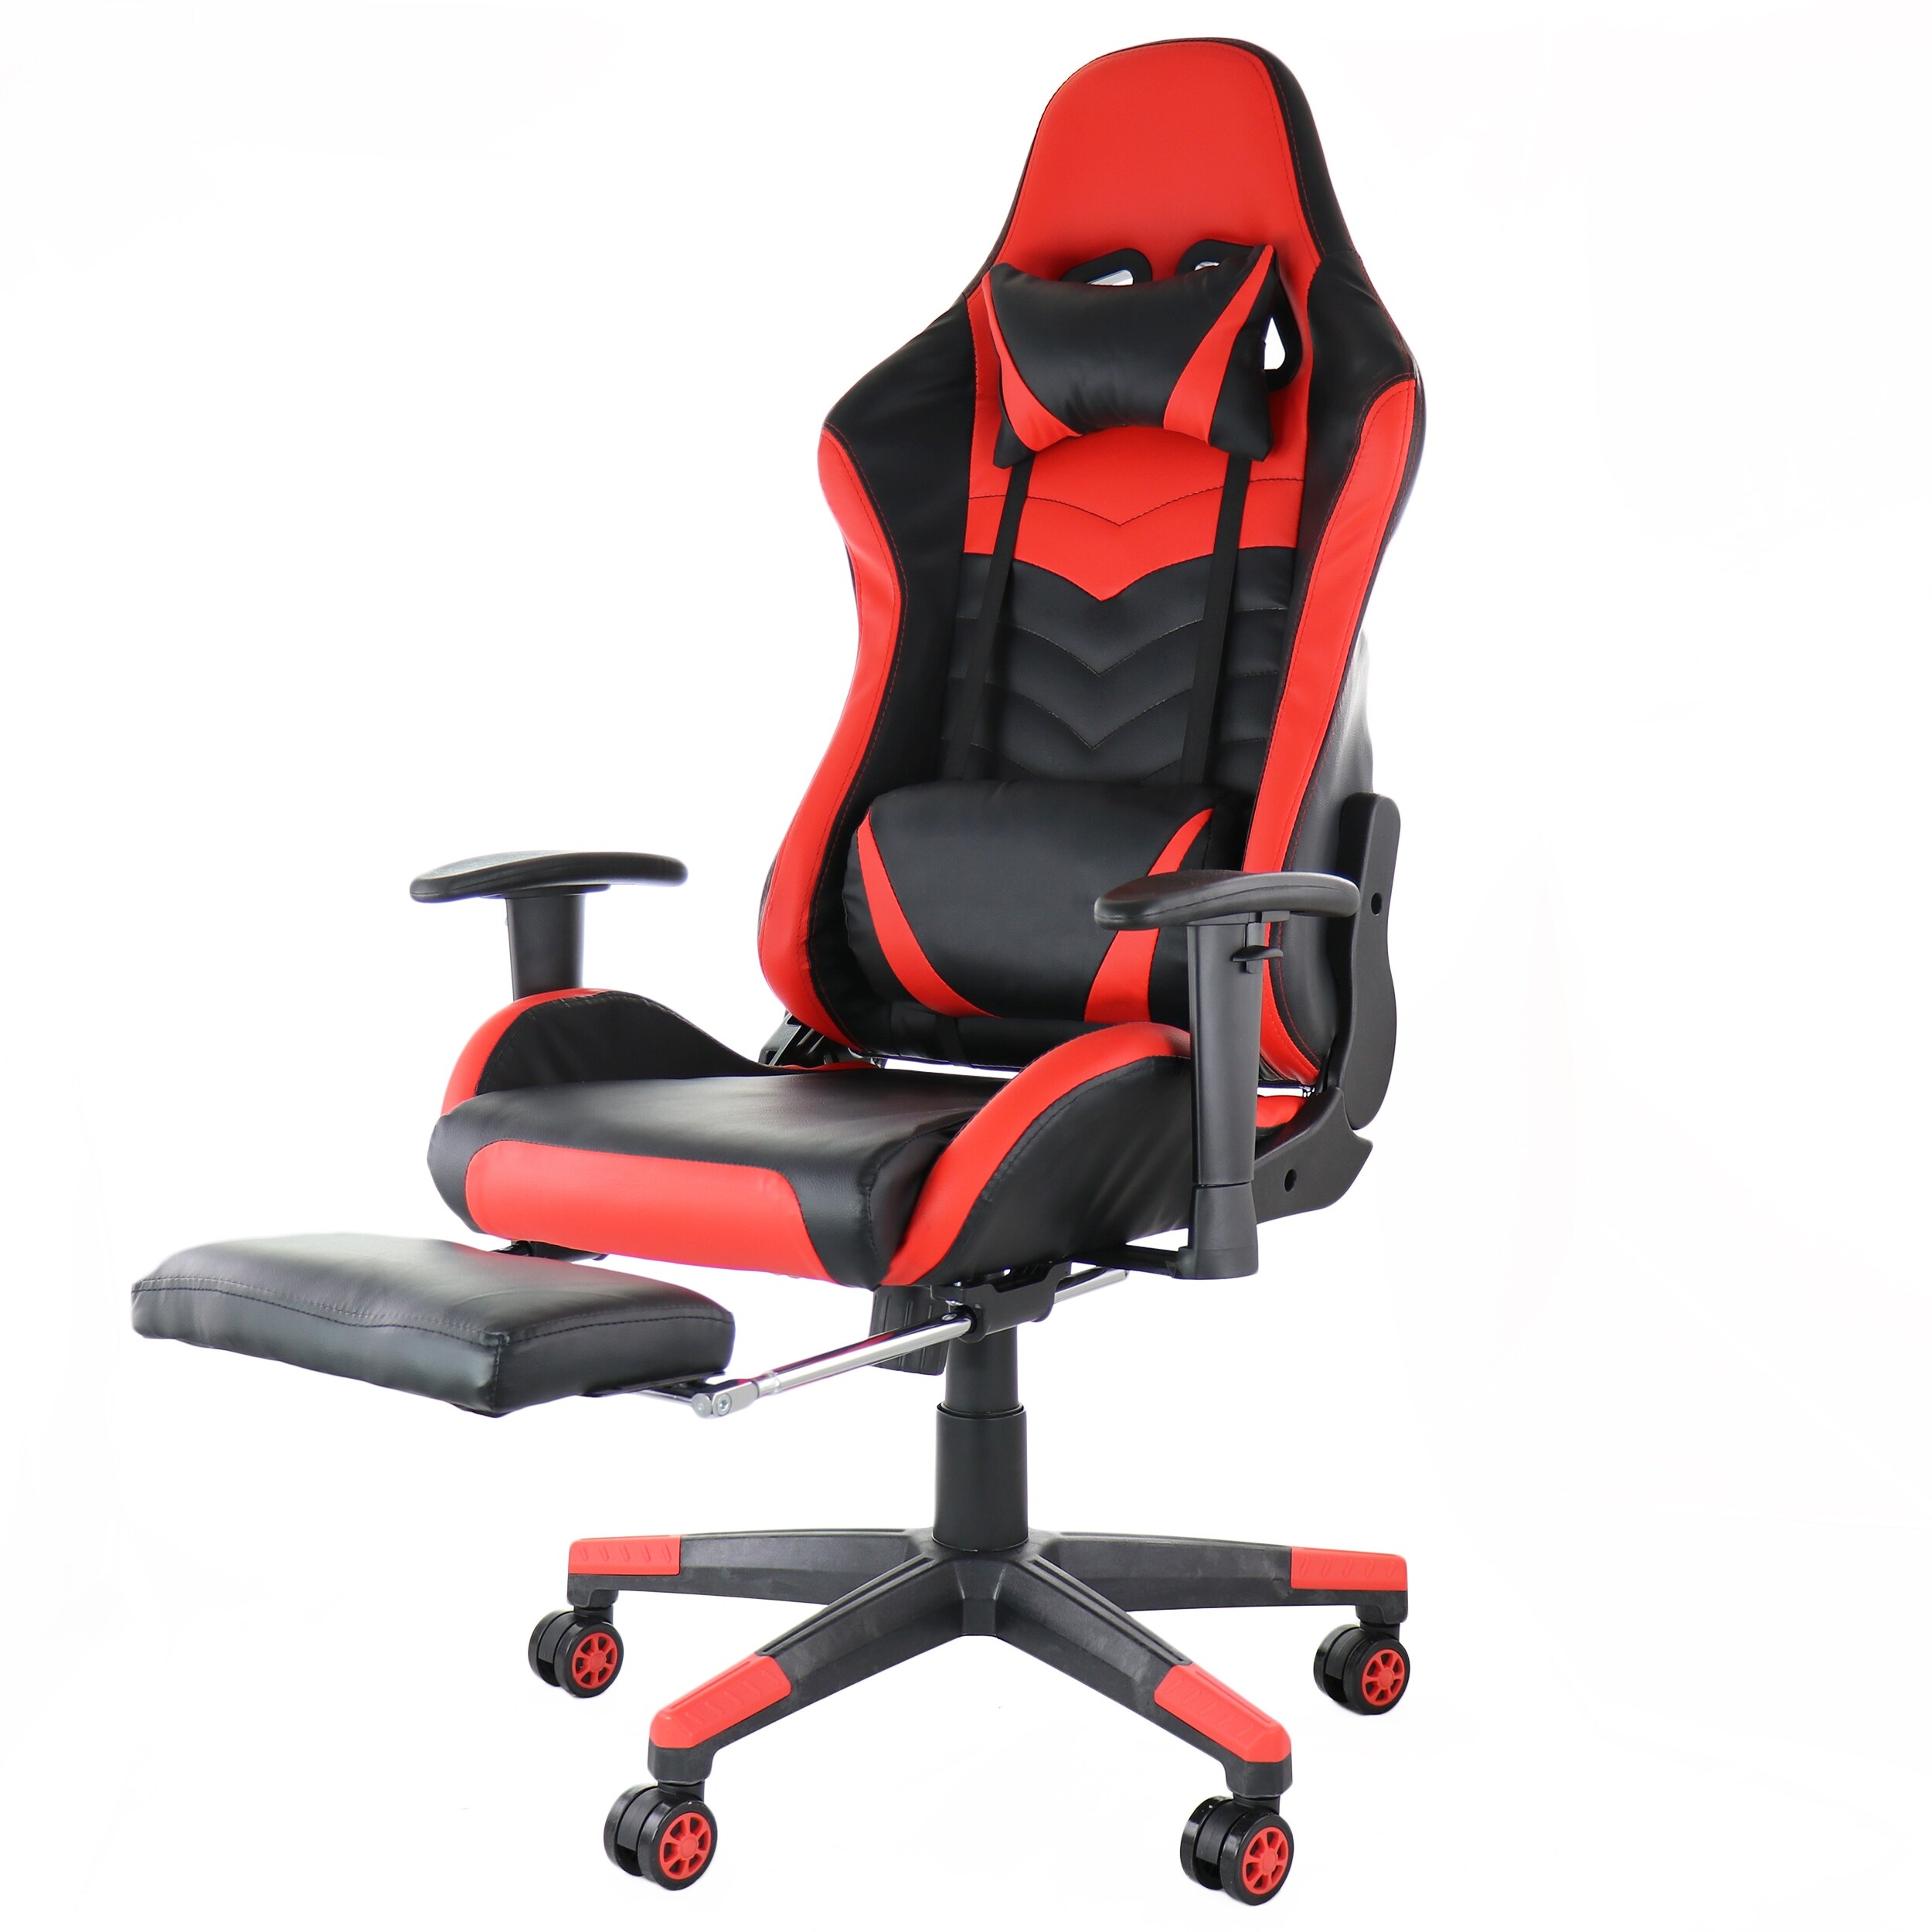 https://ak1.ostkcdn.com/images/products/is/images/direct/b74b4e484bef7c374f939ff53aaae89aa0f60639/GameFitz-Gaming-Chair-in-Black-and-Red.jpg